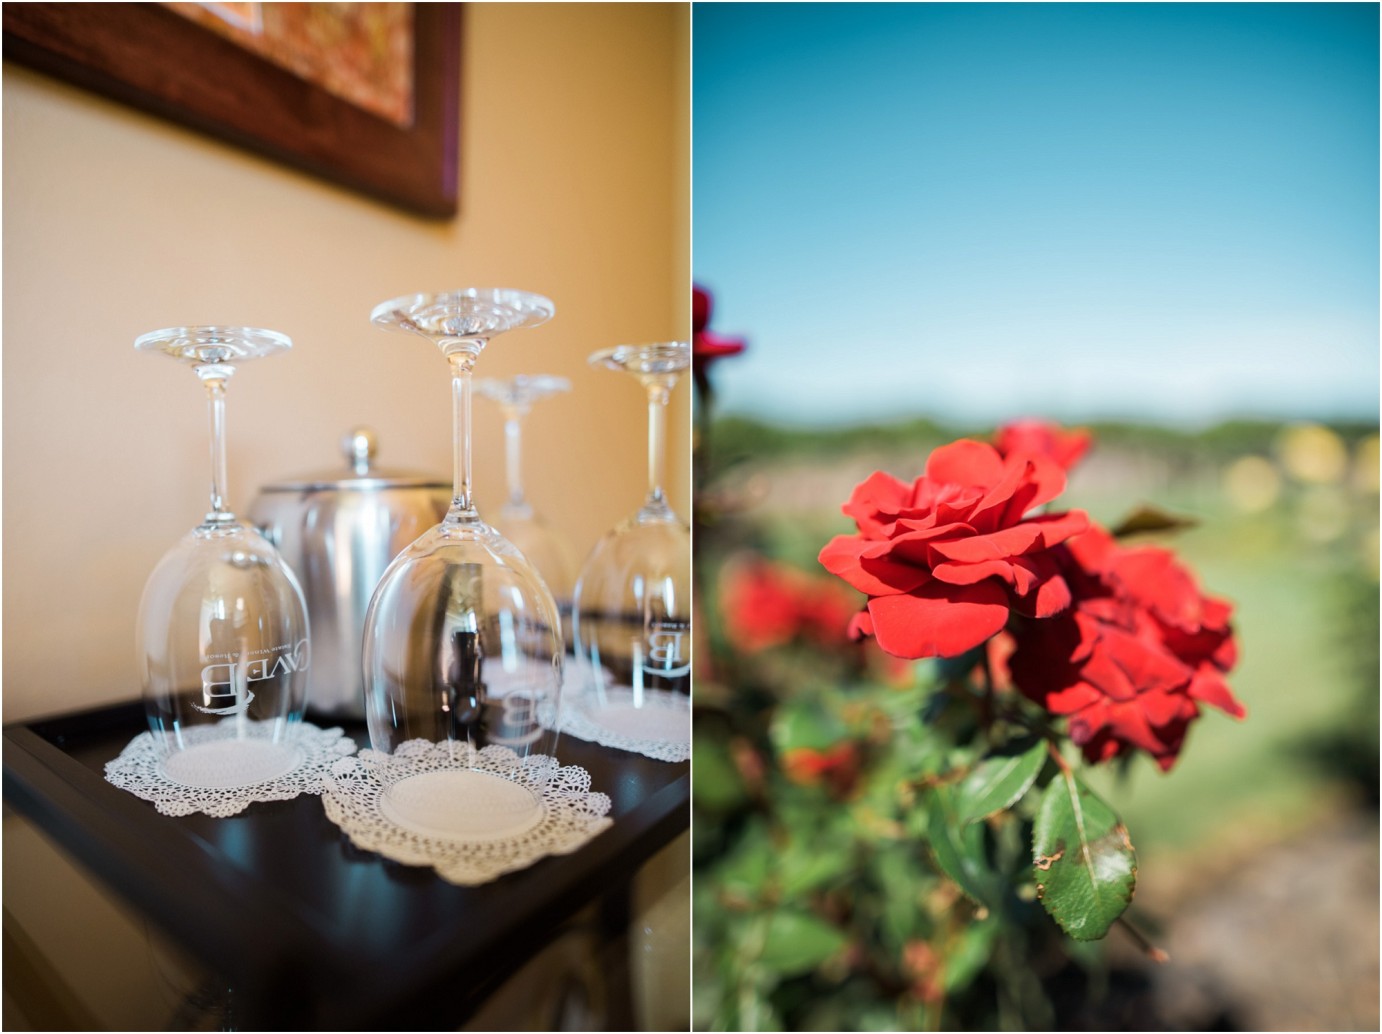 Cave B Winery wine glasses and flower photo